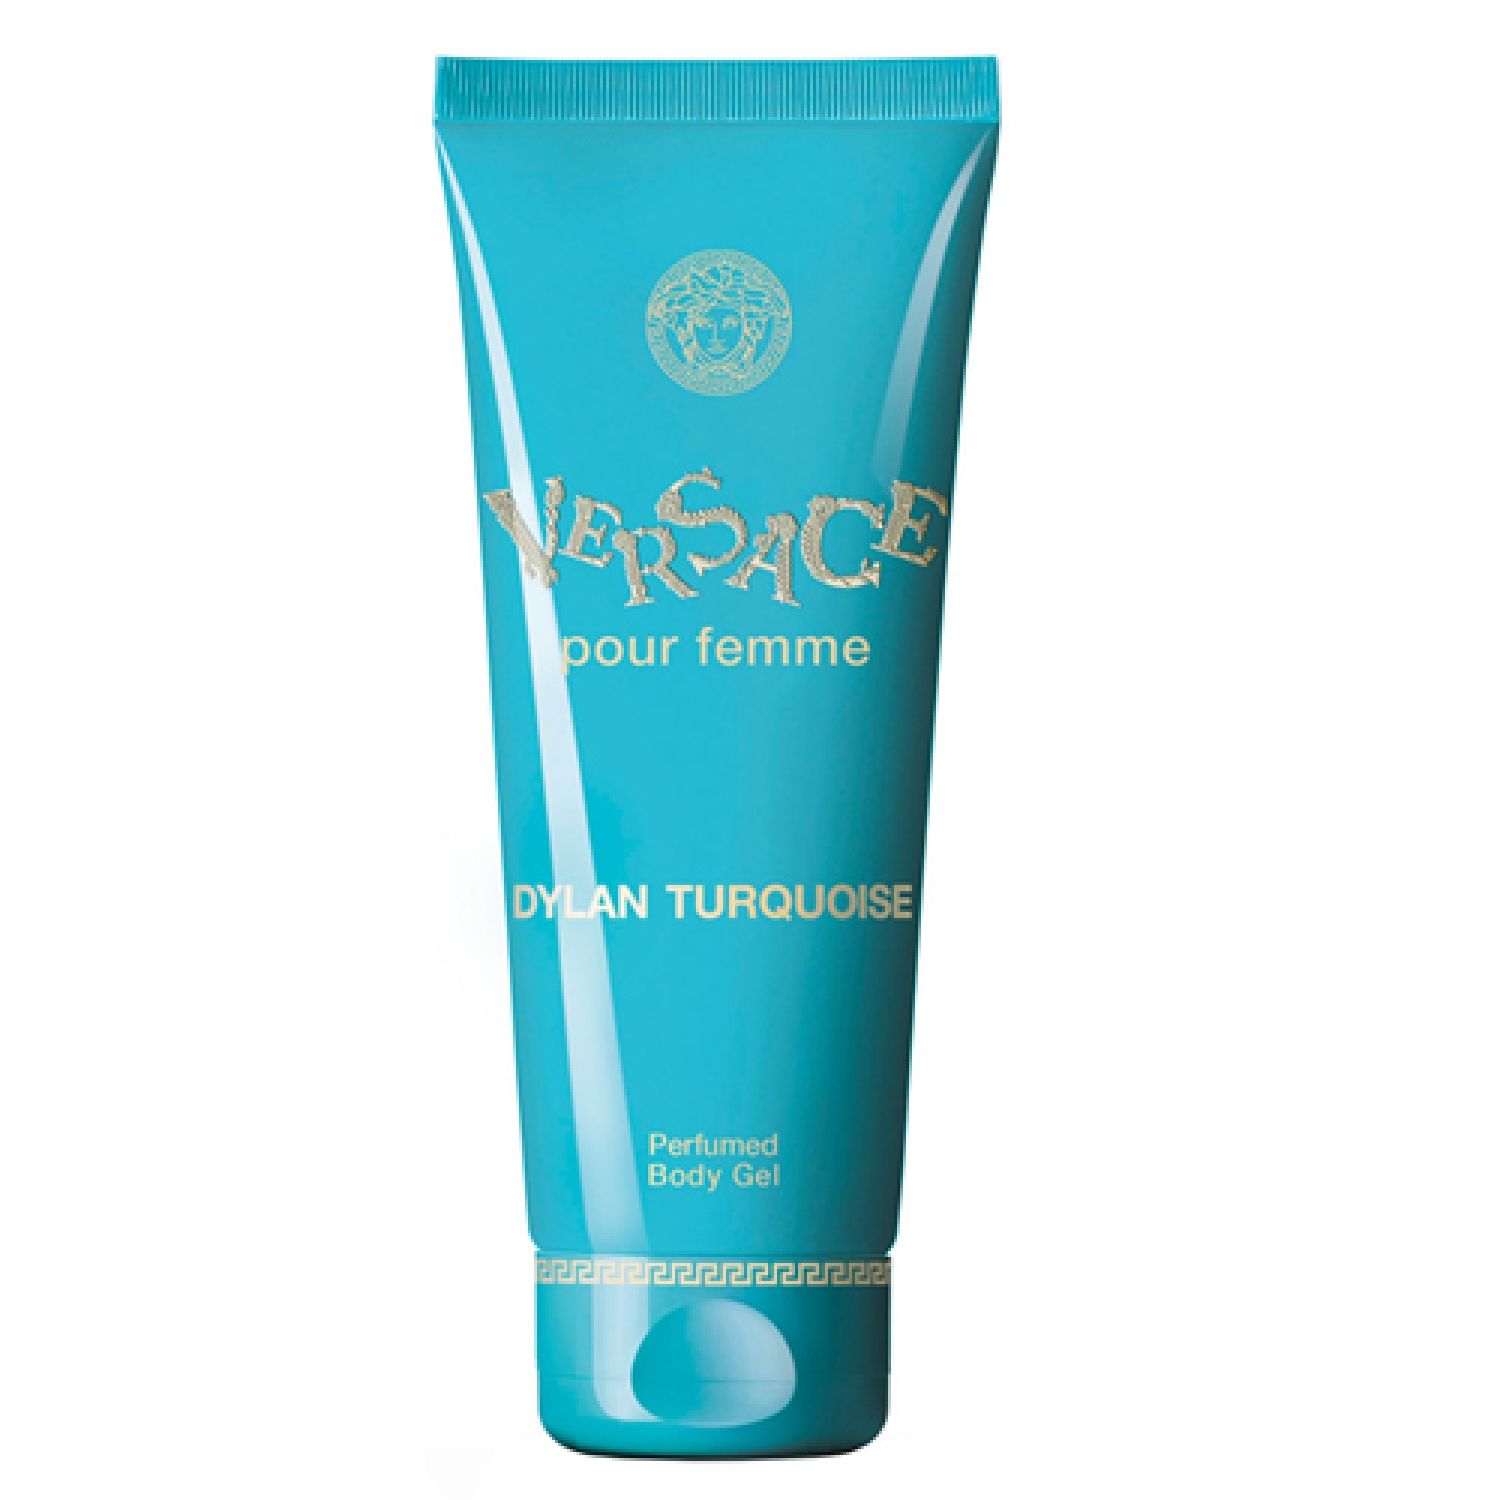 Versace Dylan Turquoise pour femme Body Gel